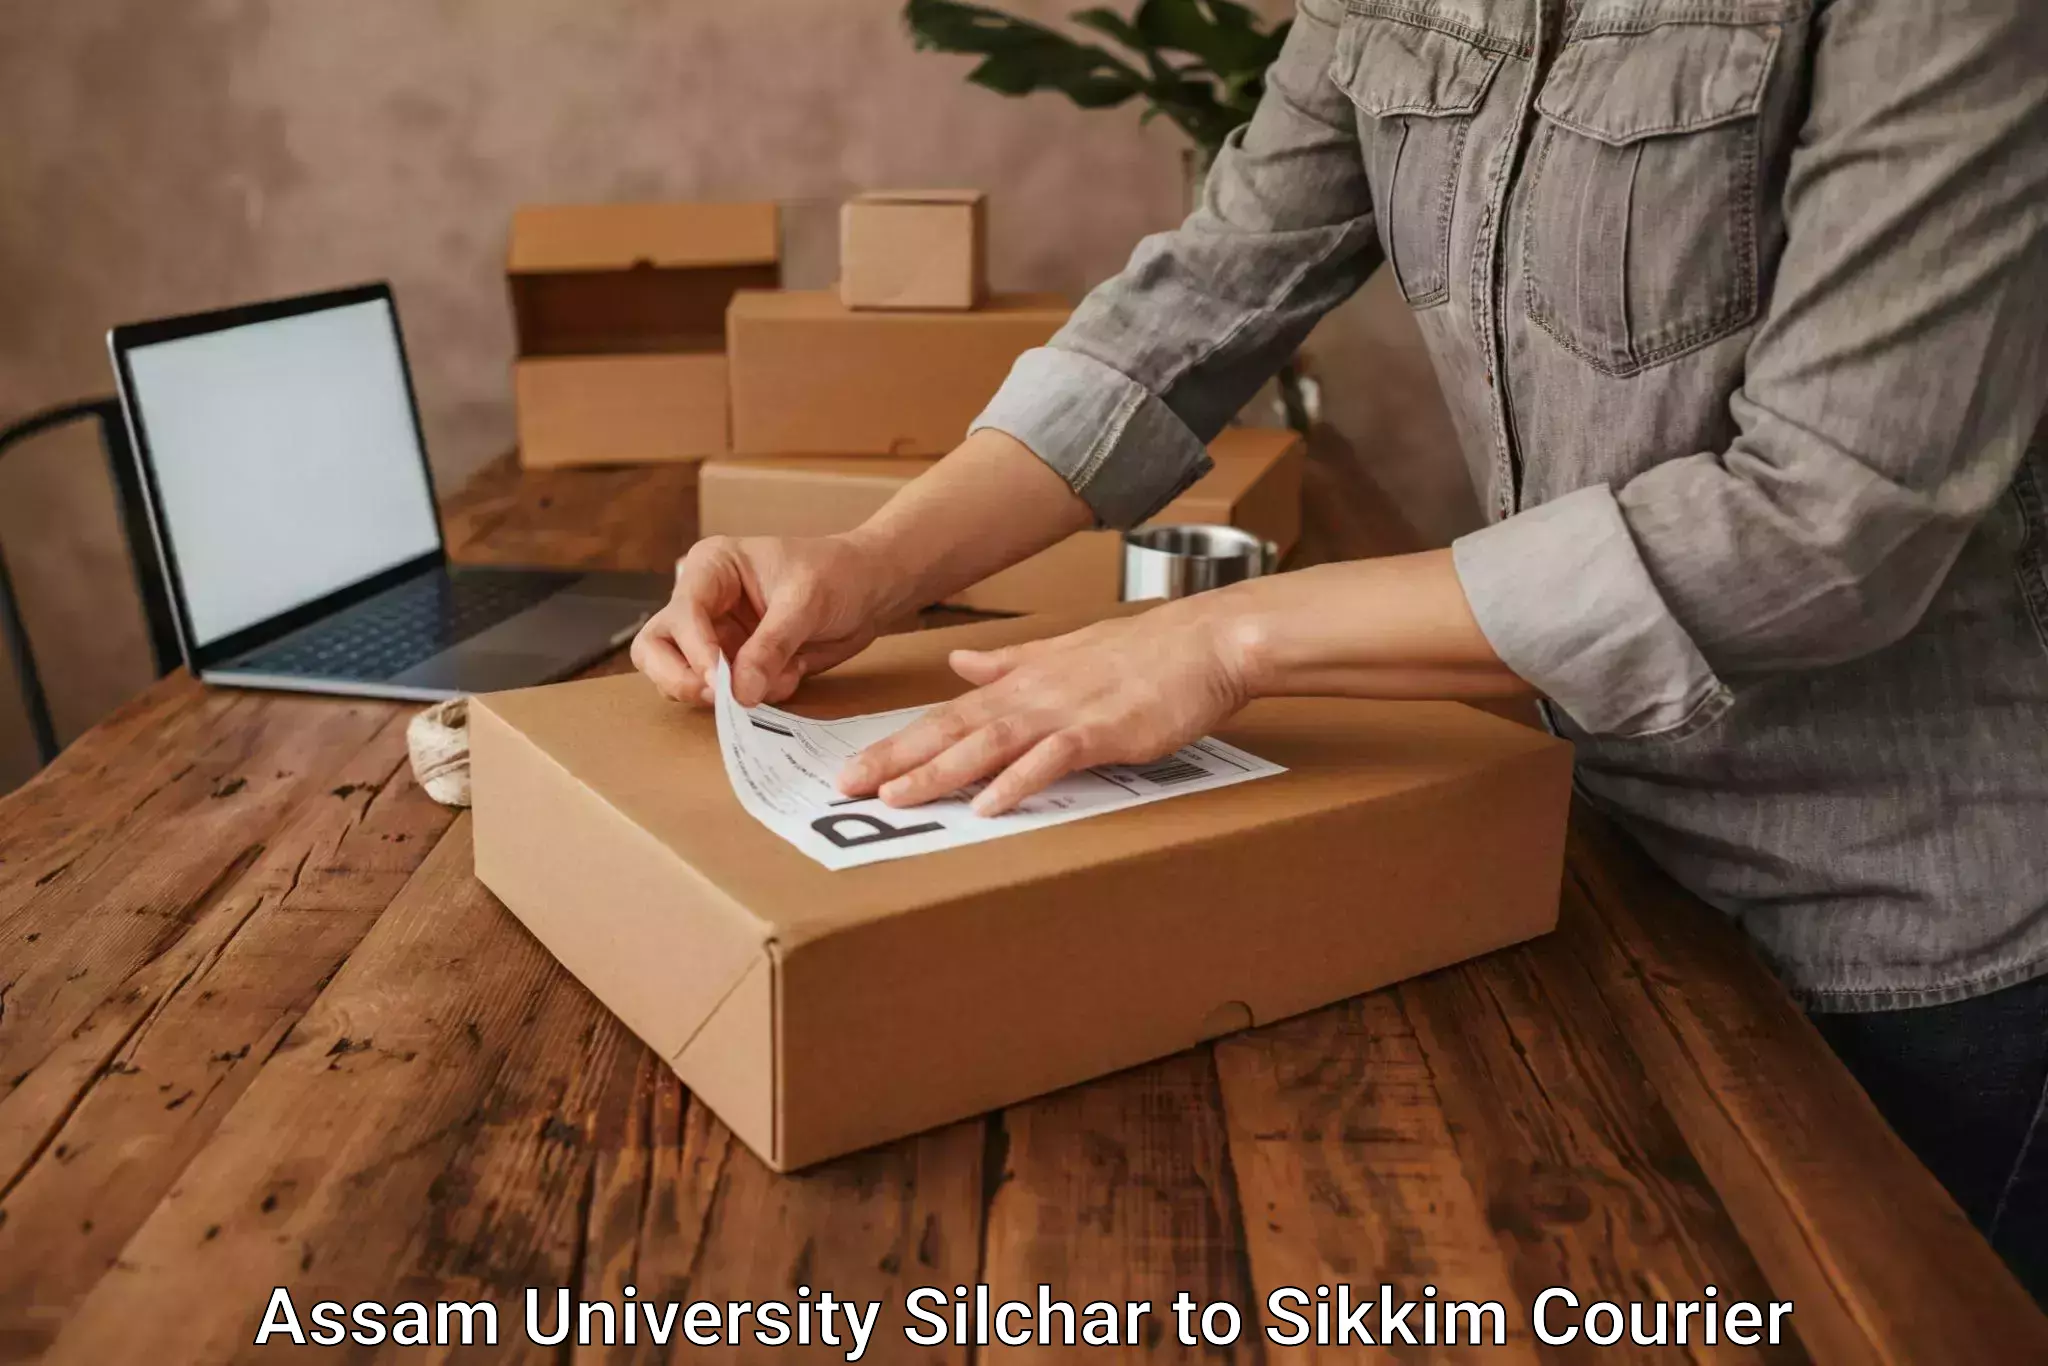 Global courier networks Assam University Silchar to Pelling